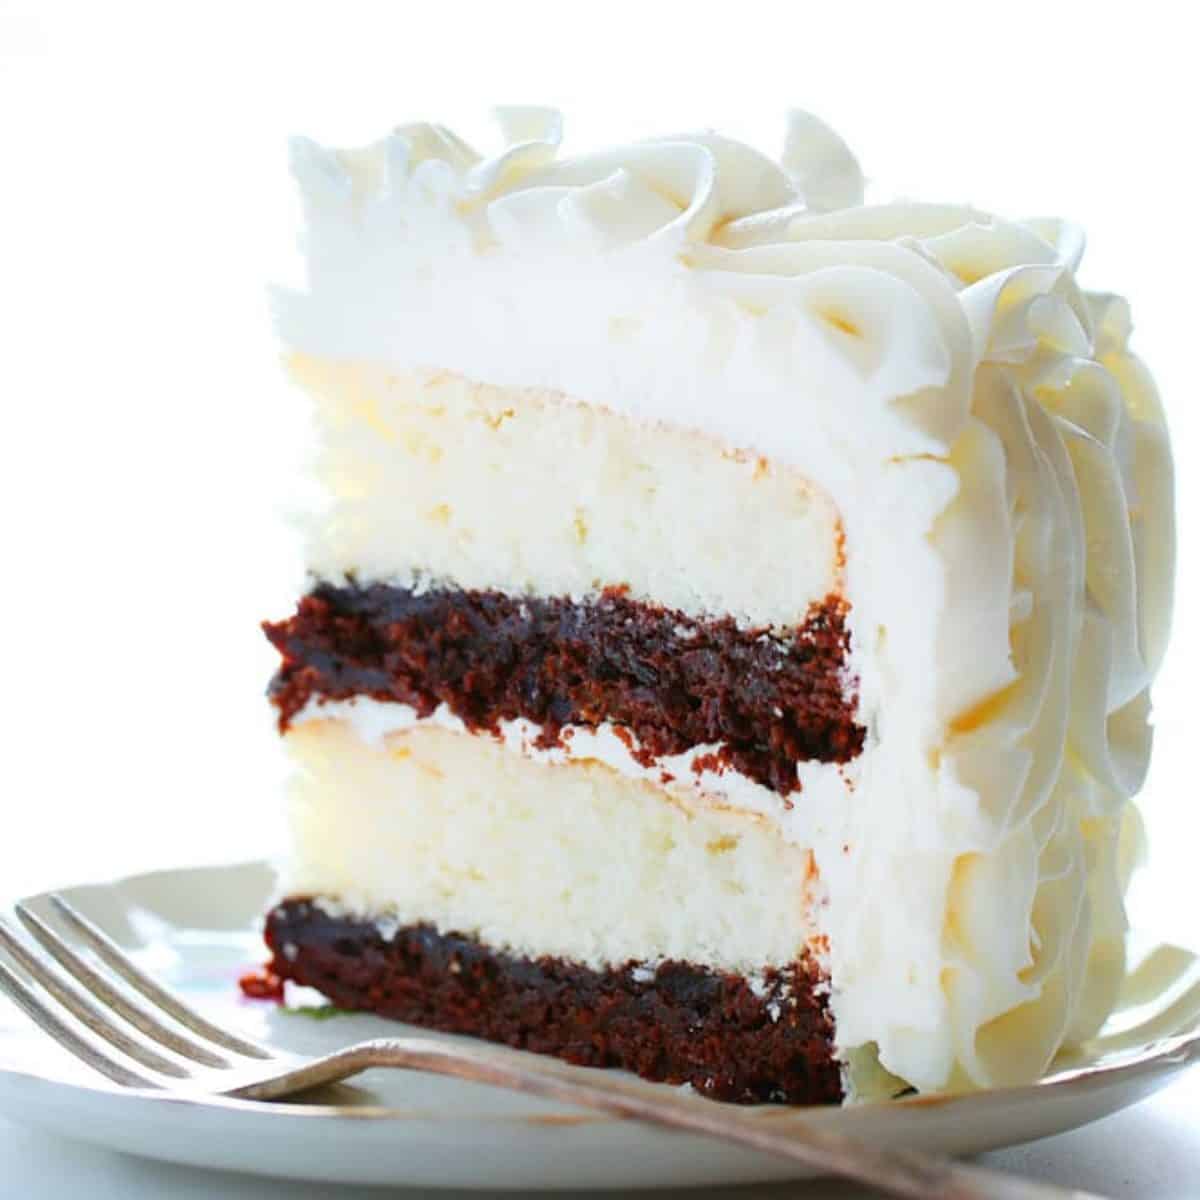 Stunning rosettes cover this flavorful cake... white cake layers complemented with rich fudgy brownie deliciousness!